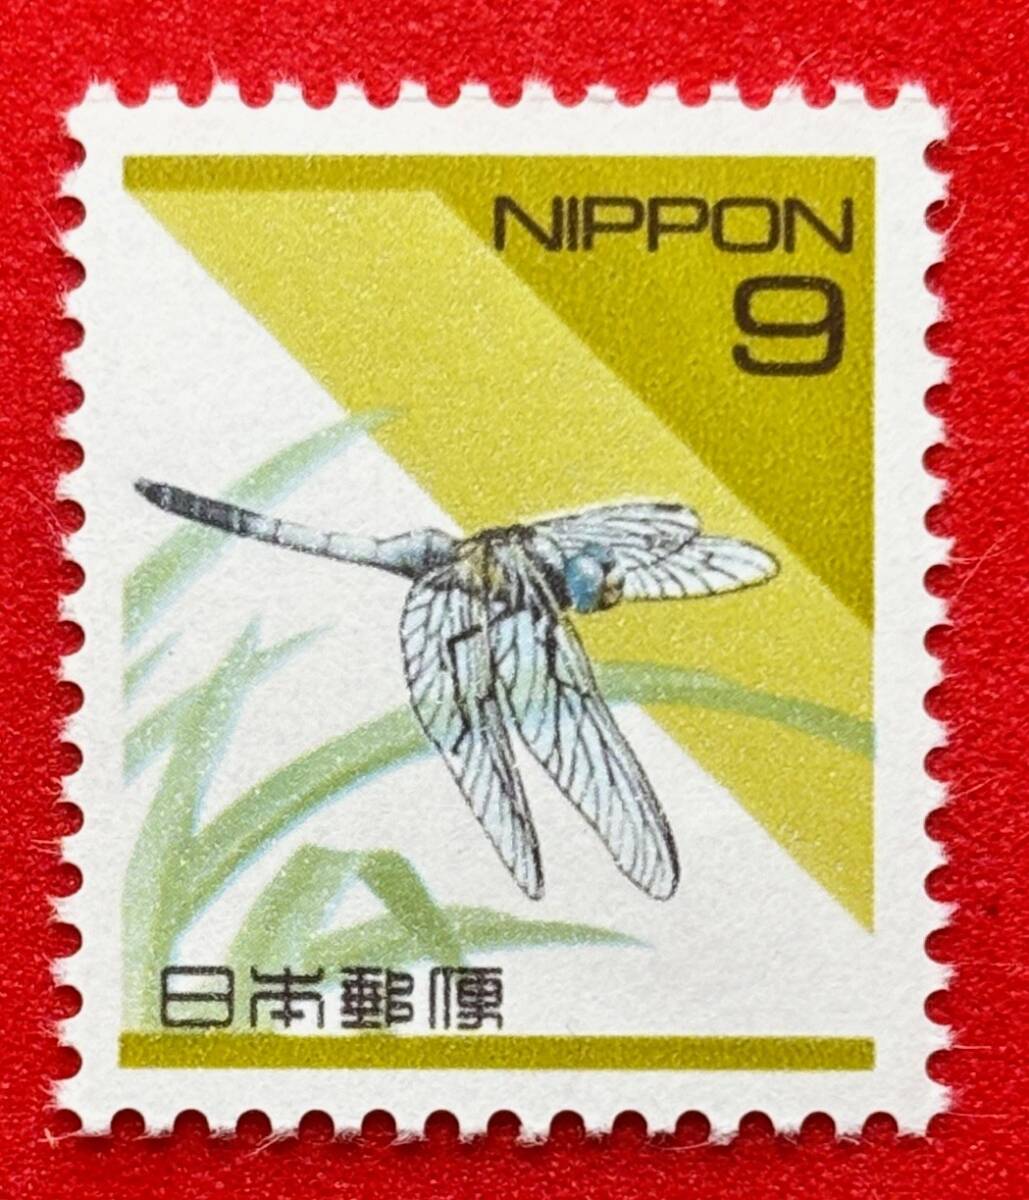  Heisei era stamps [siokala dragonfly ]9 jpy unused NH beautiful goods together dealings possible 